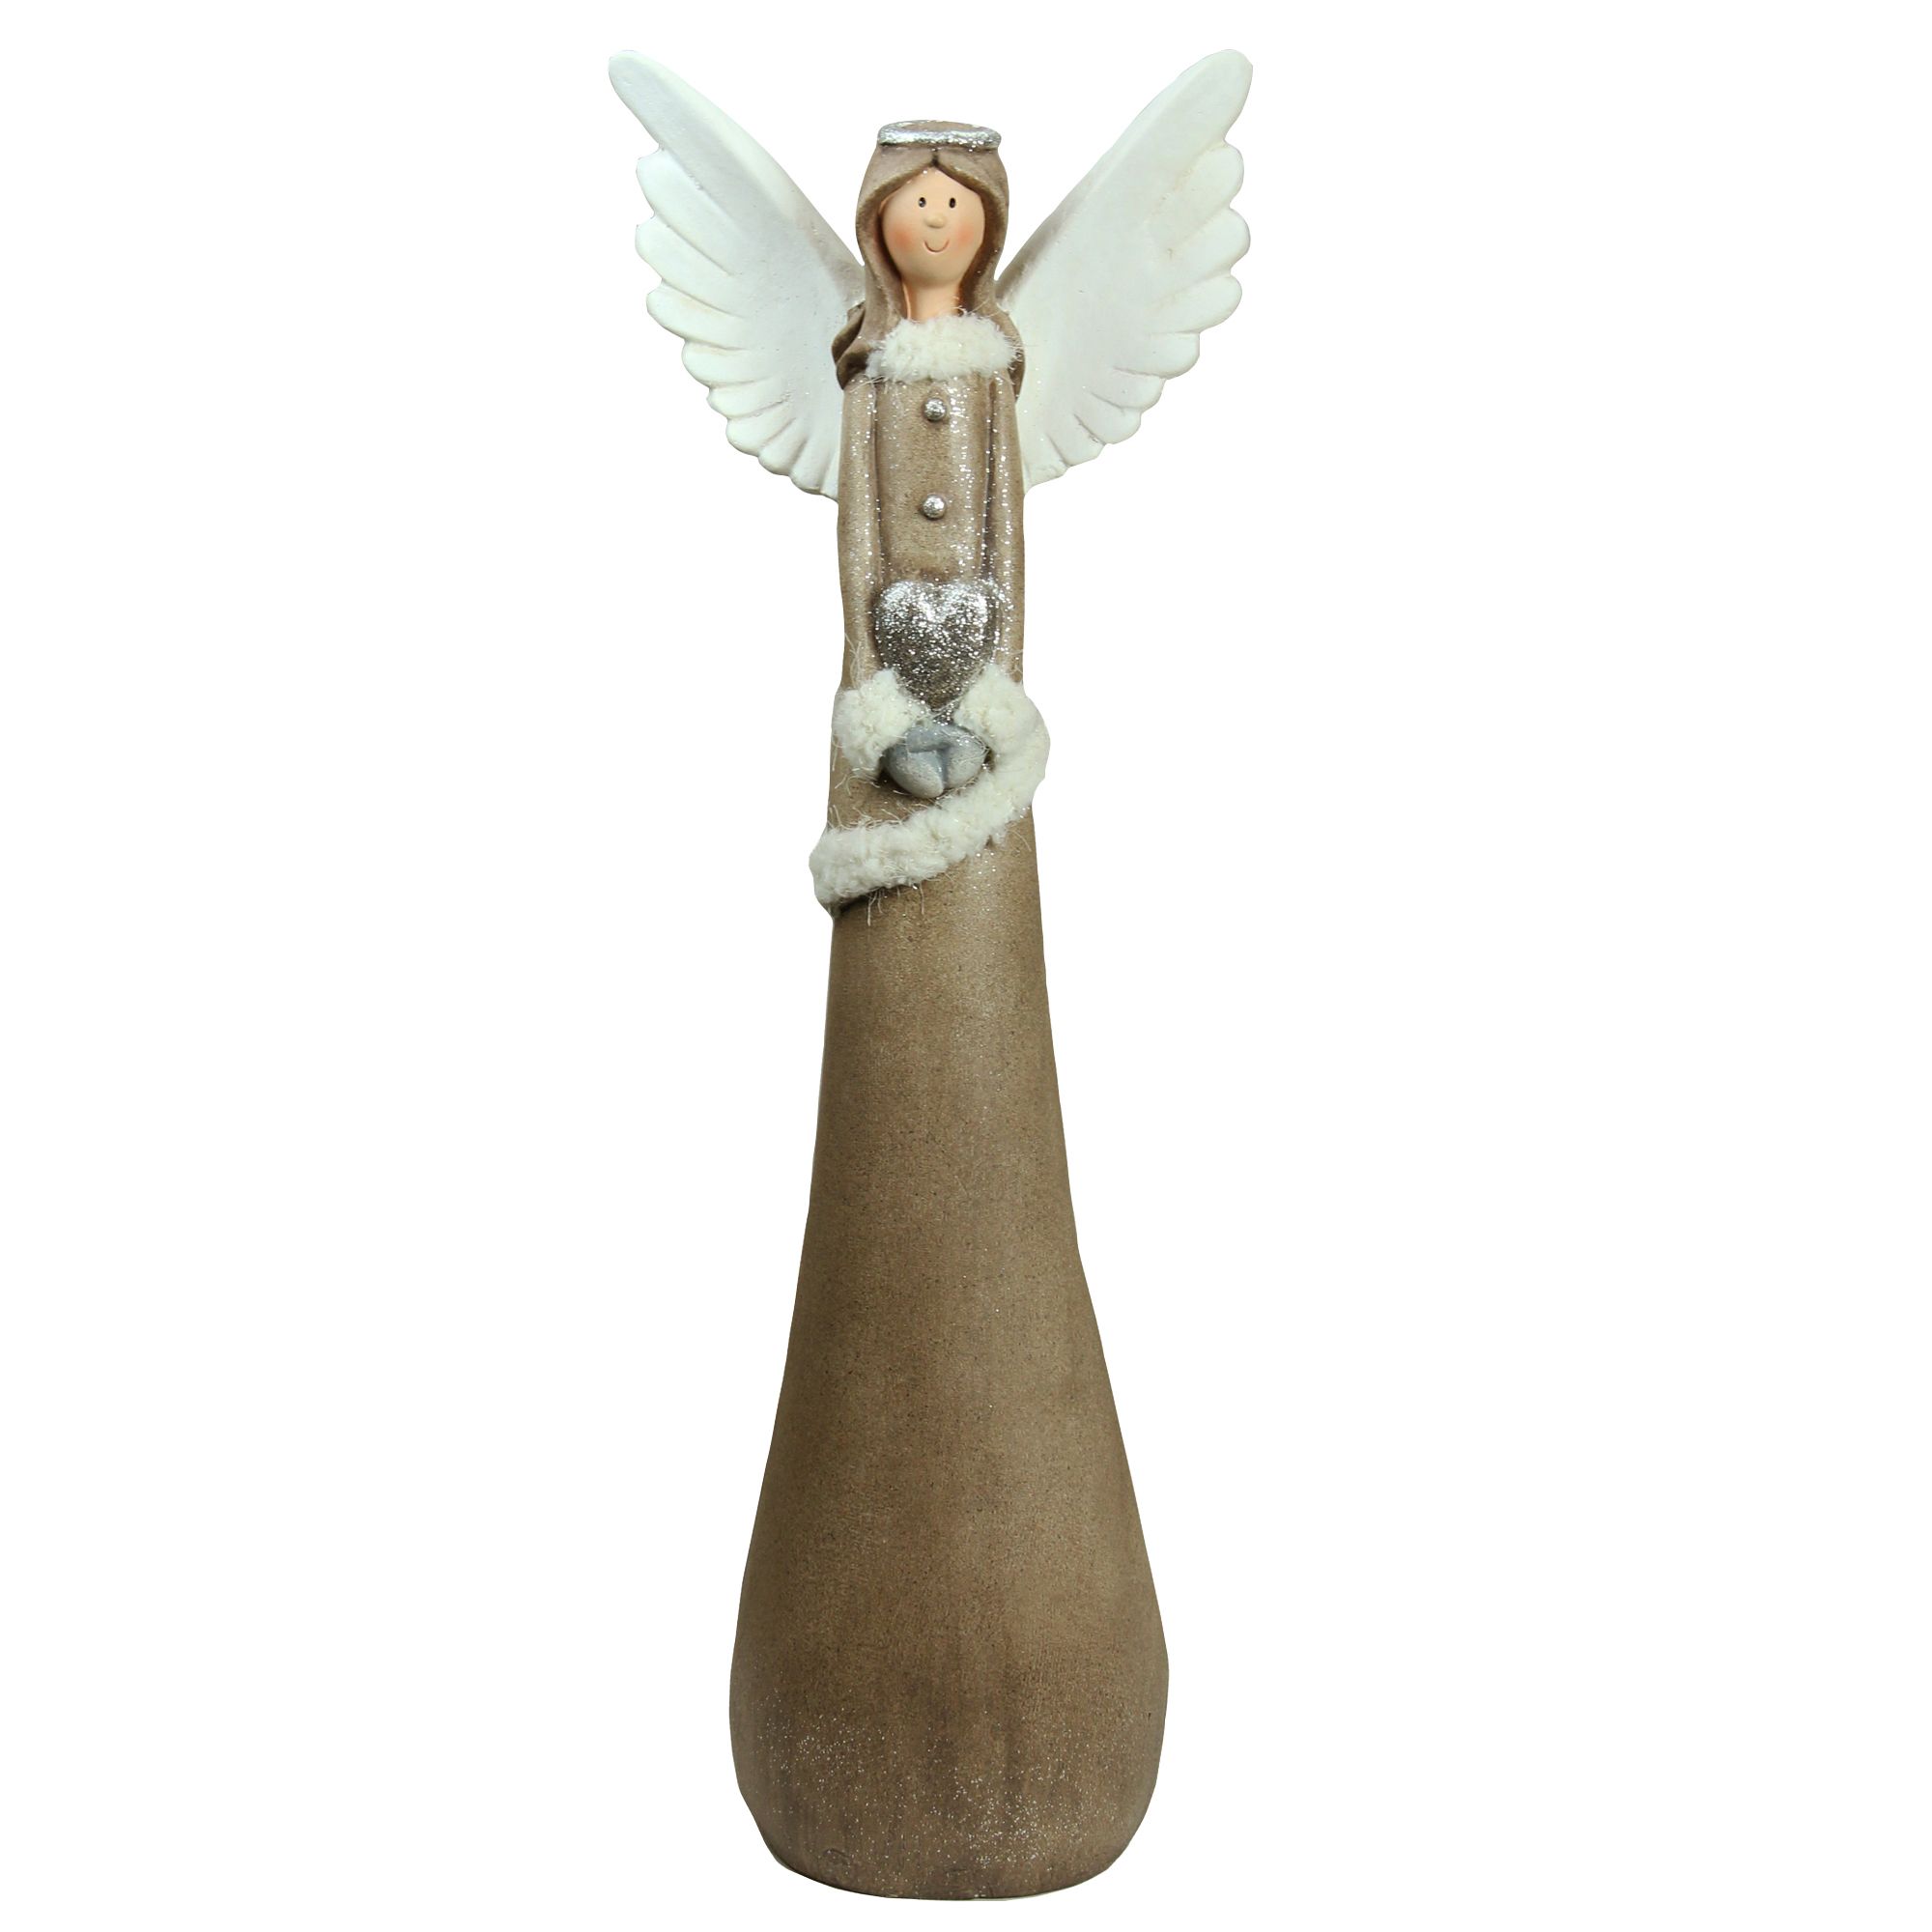 Northlight 24&quot; Angel with Heart Christmas Tabletop Figurine - Brown and White